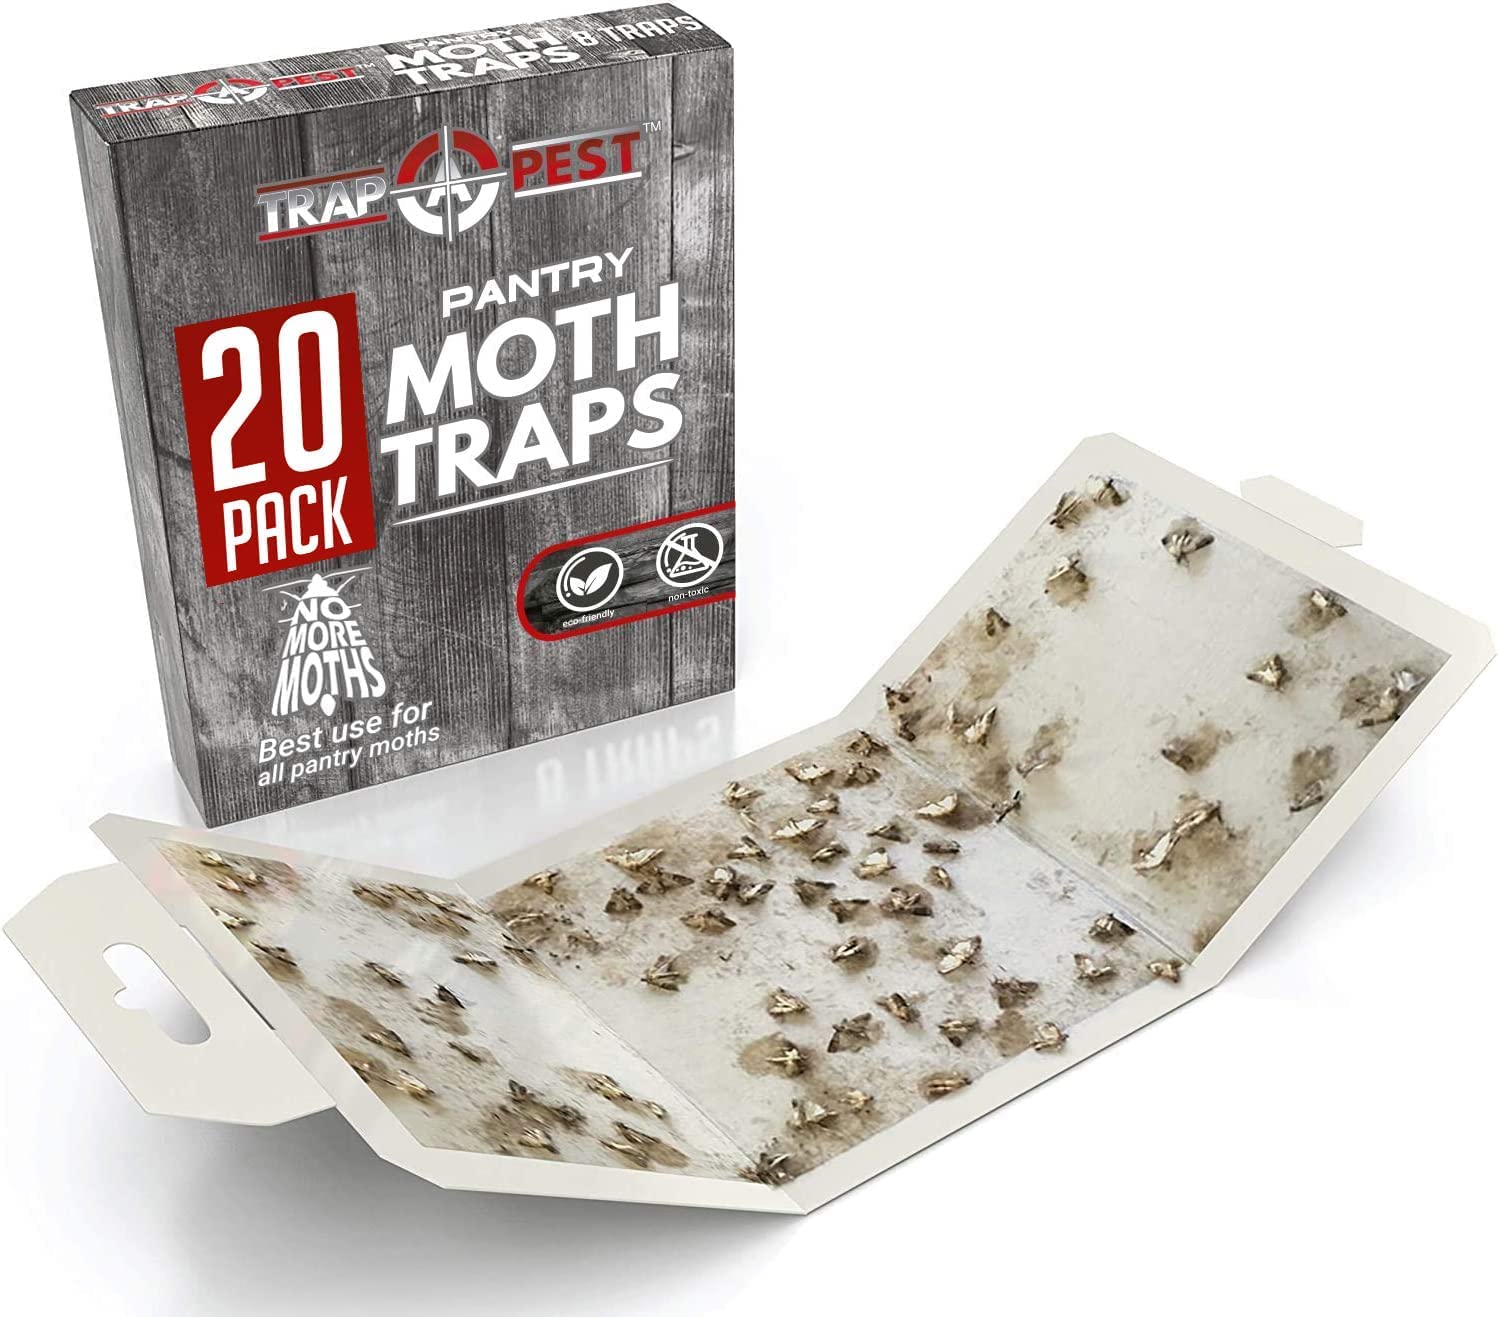 Pantry Pest & Moth Glue Board Traps with Pheromones 24 Count